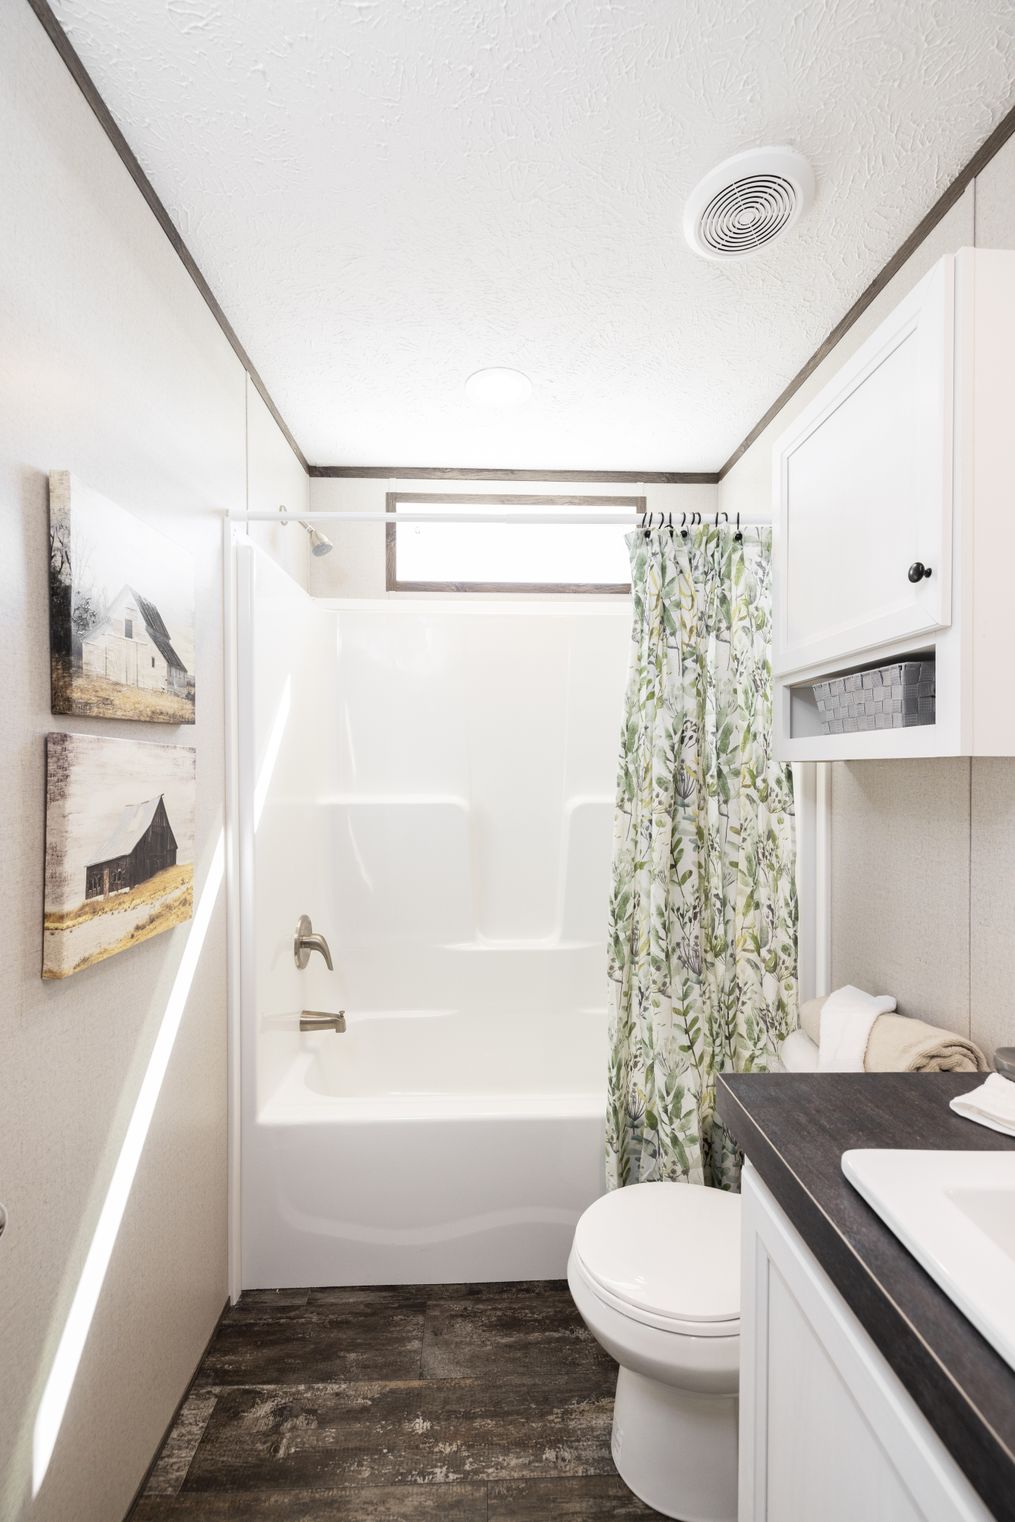 THE SURE THING Guest Bathroom. This Home features 3 bedrooms and 2 baths.